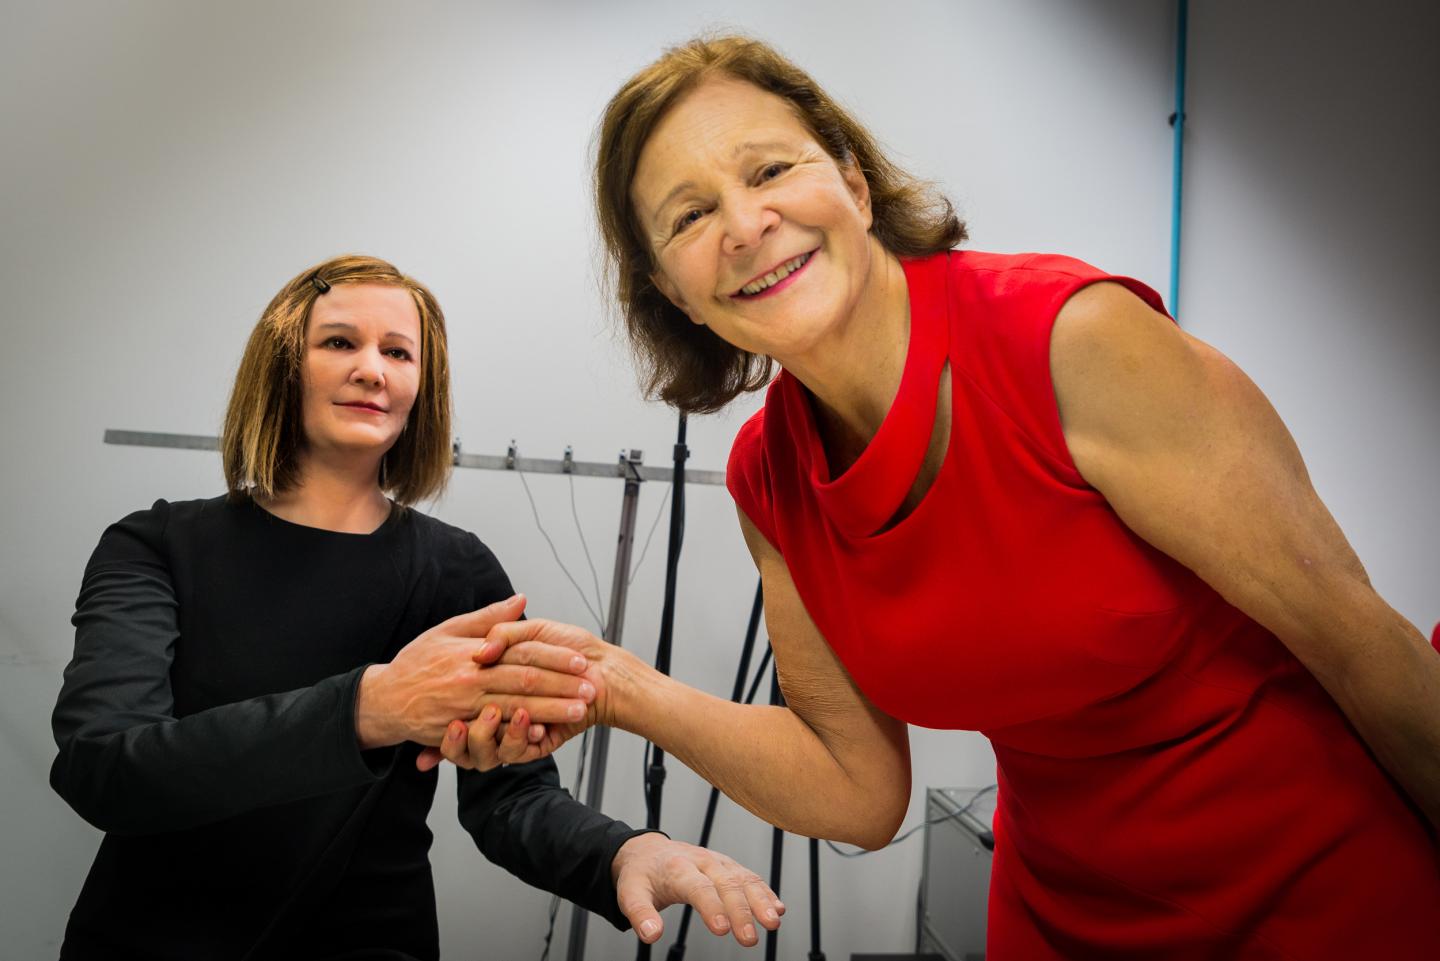 Nadia Thalmann (Right) Shaking Hands With Nadine